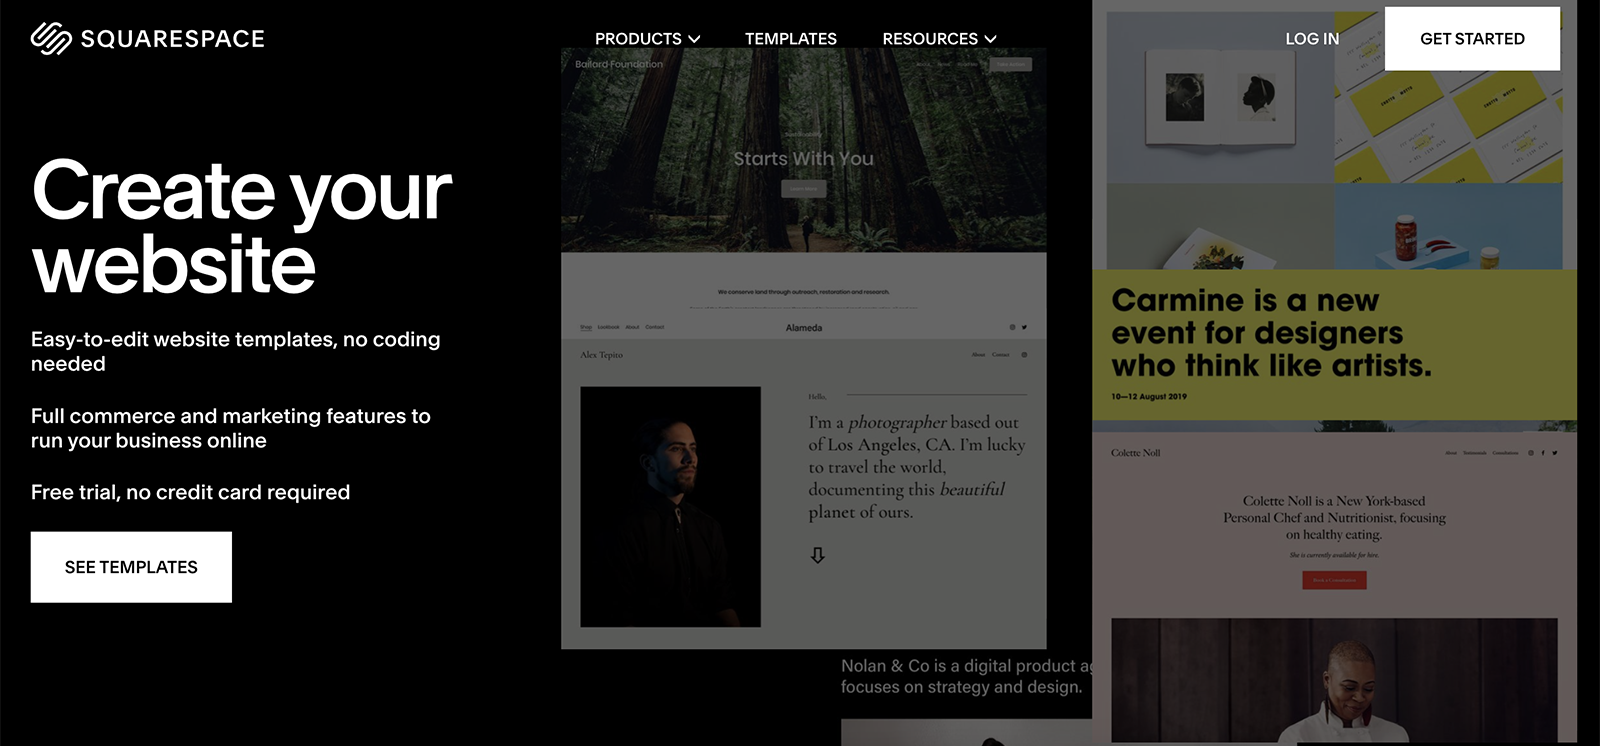 Screenshot of Squarespace home page